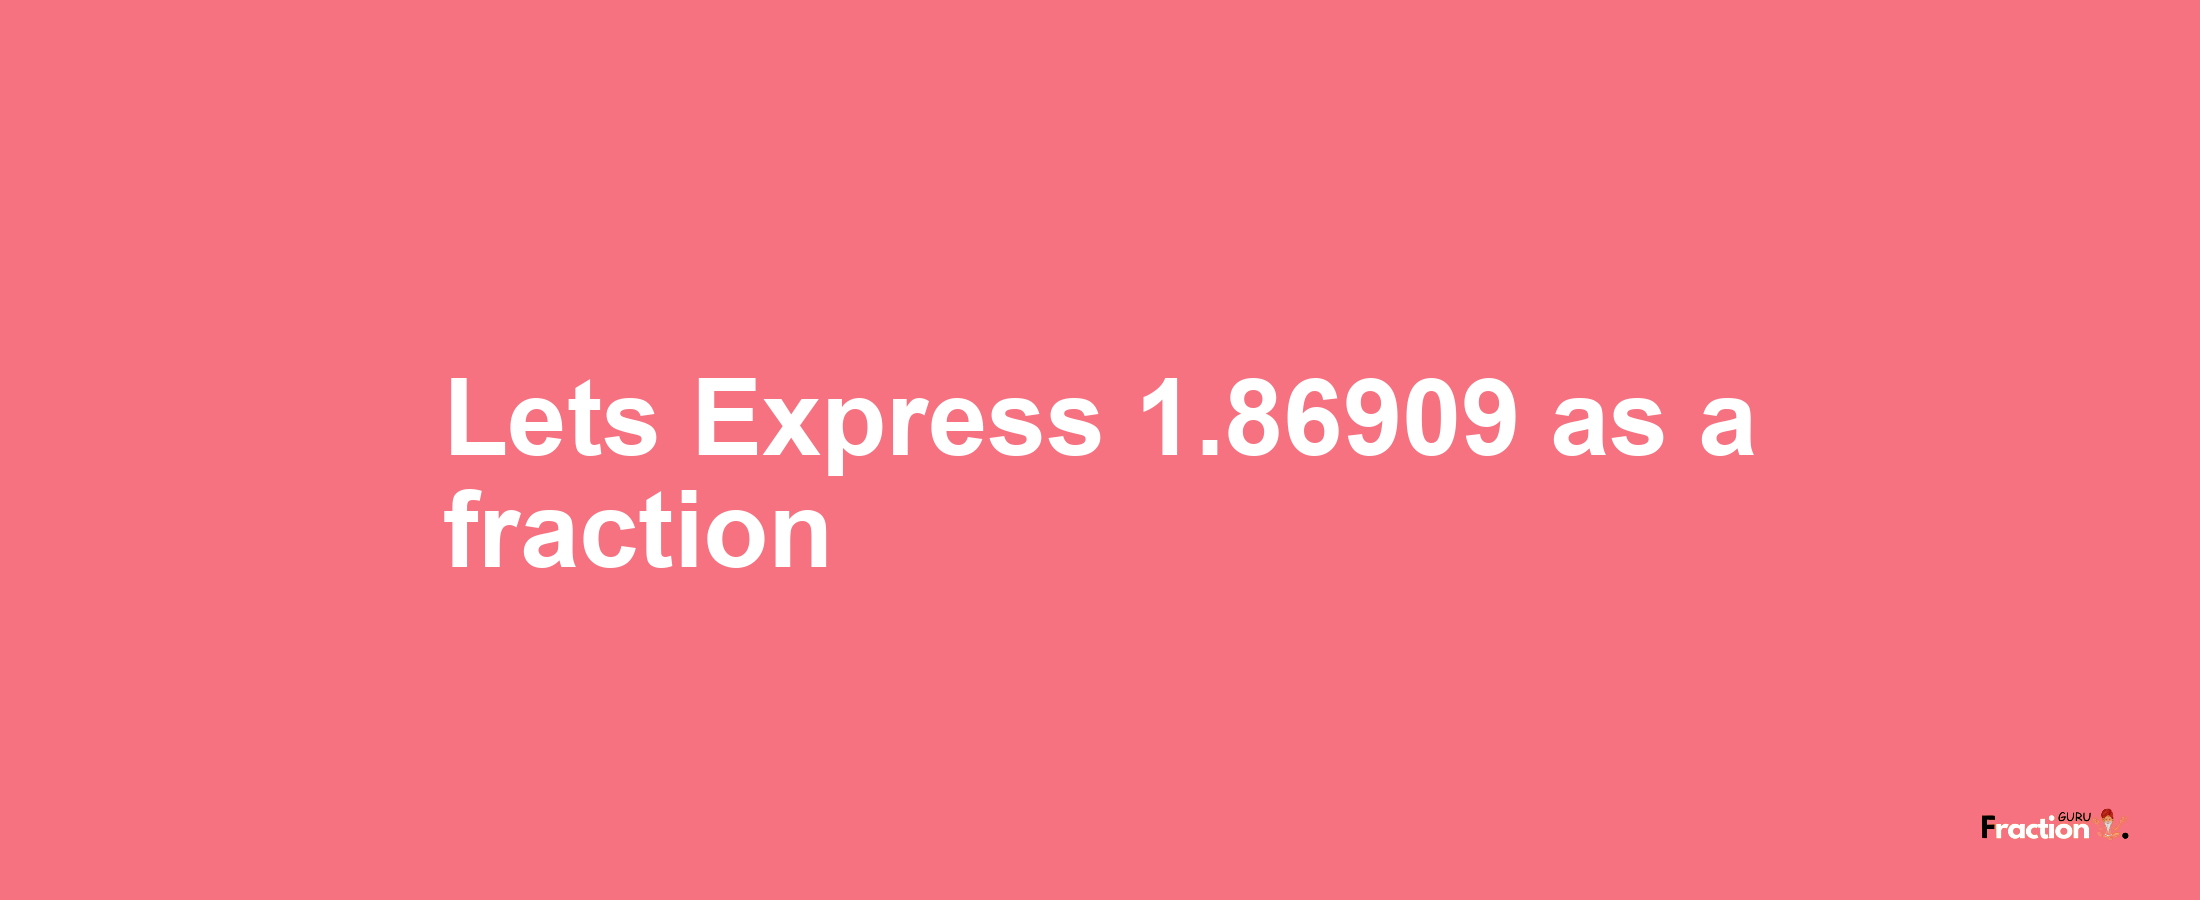 Lets Express 1.86909 as afraction